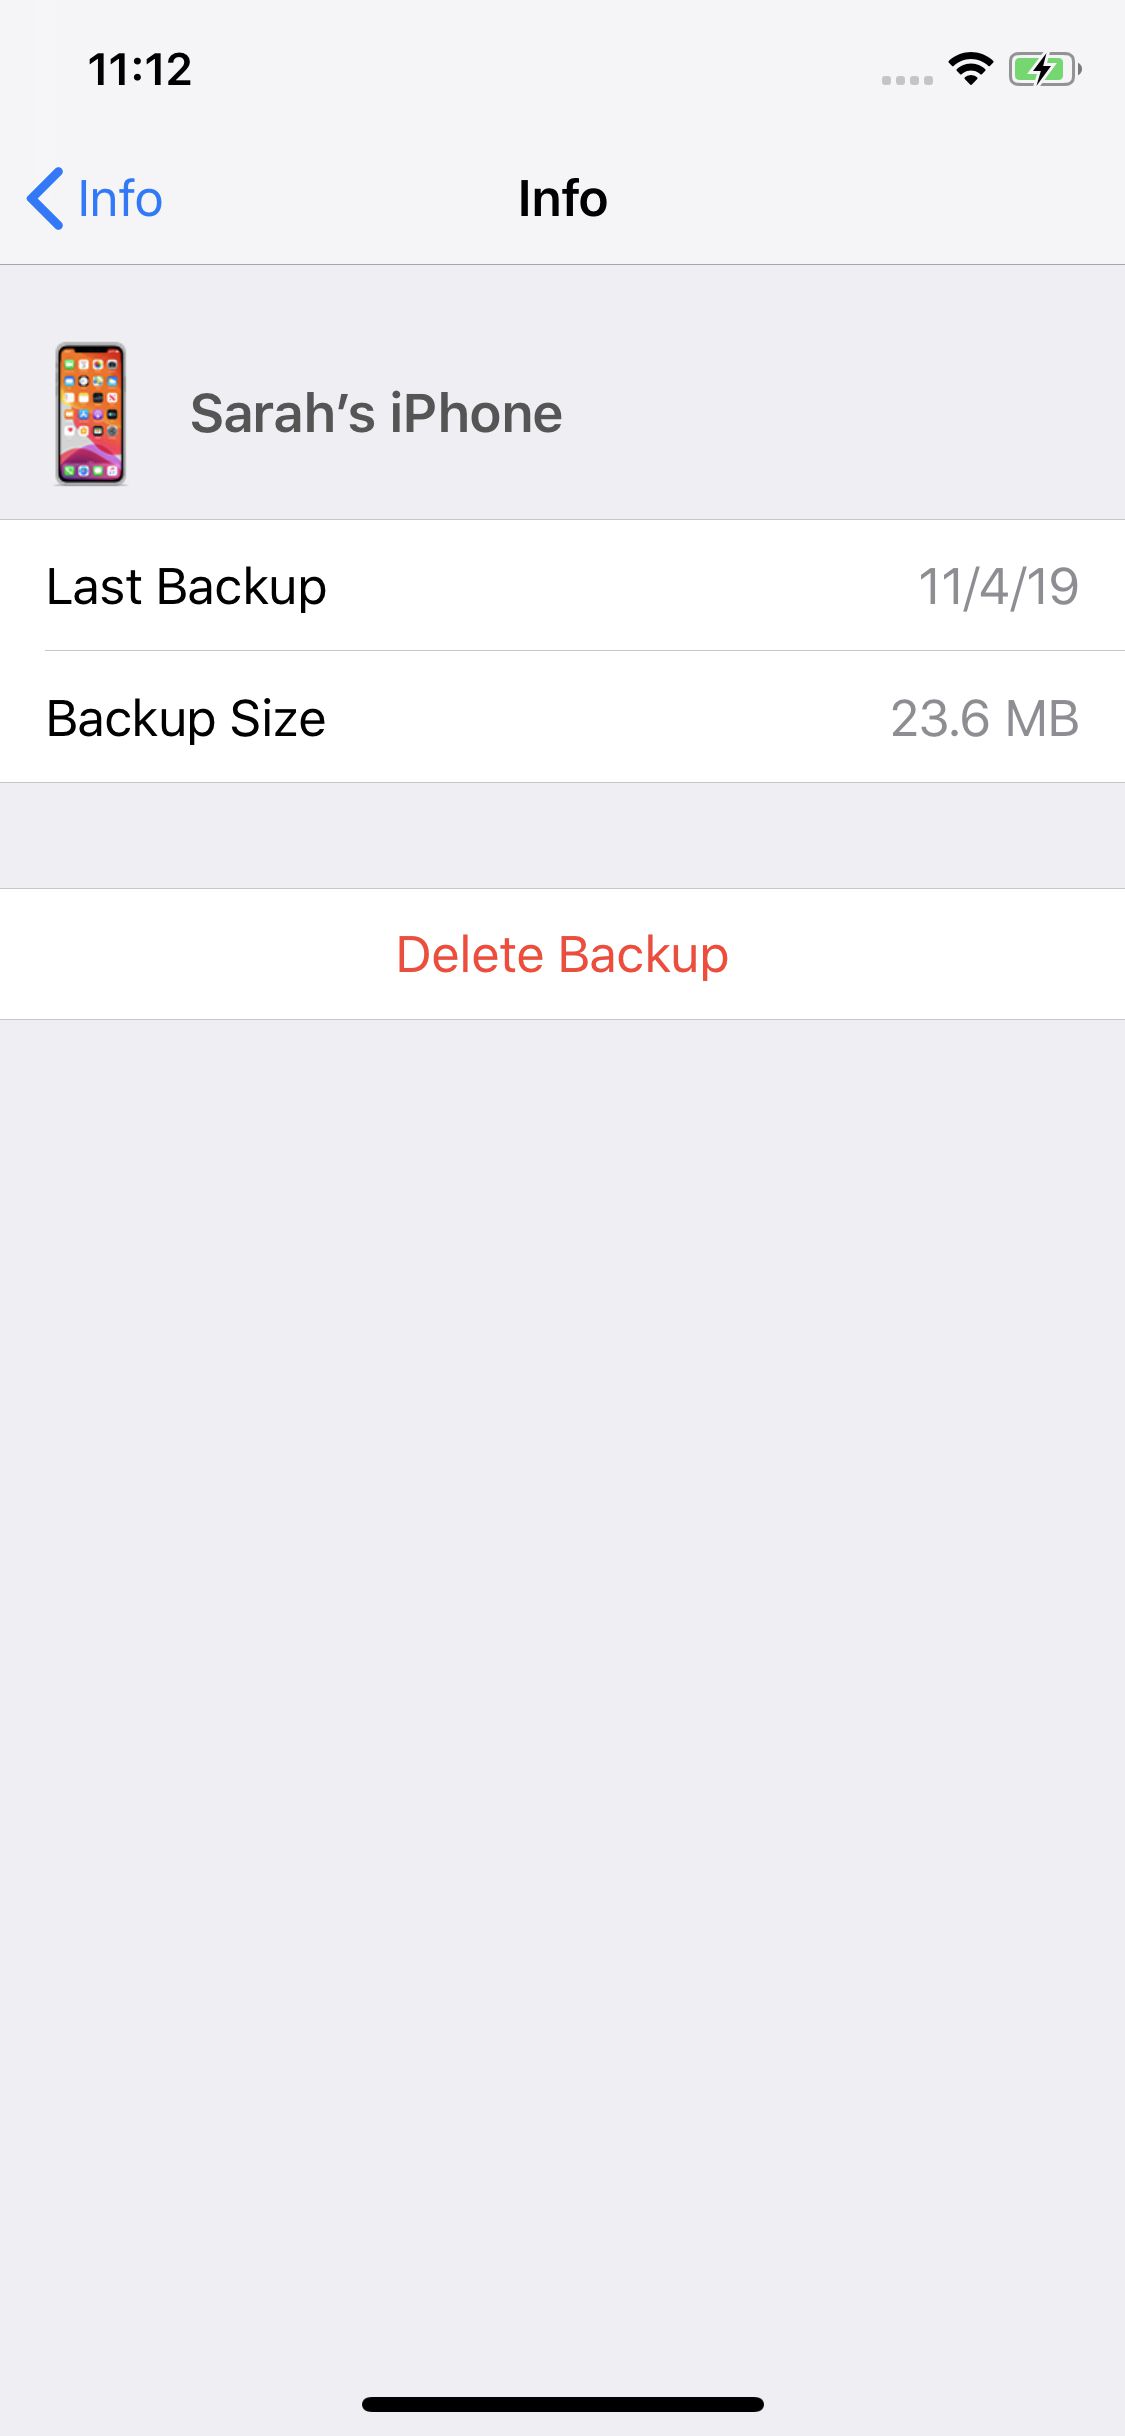 How to back up your iPhone to your Mac or PC and avoid the cloud